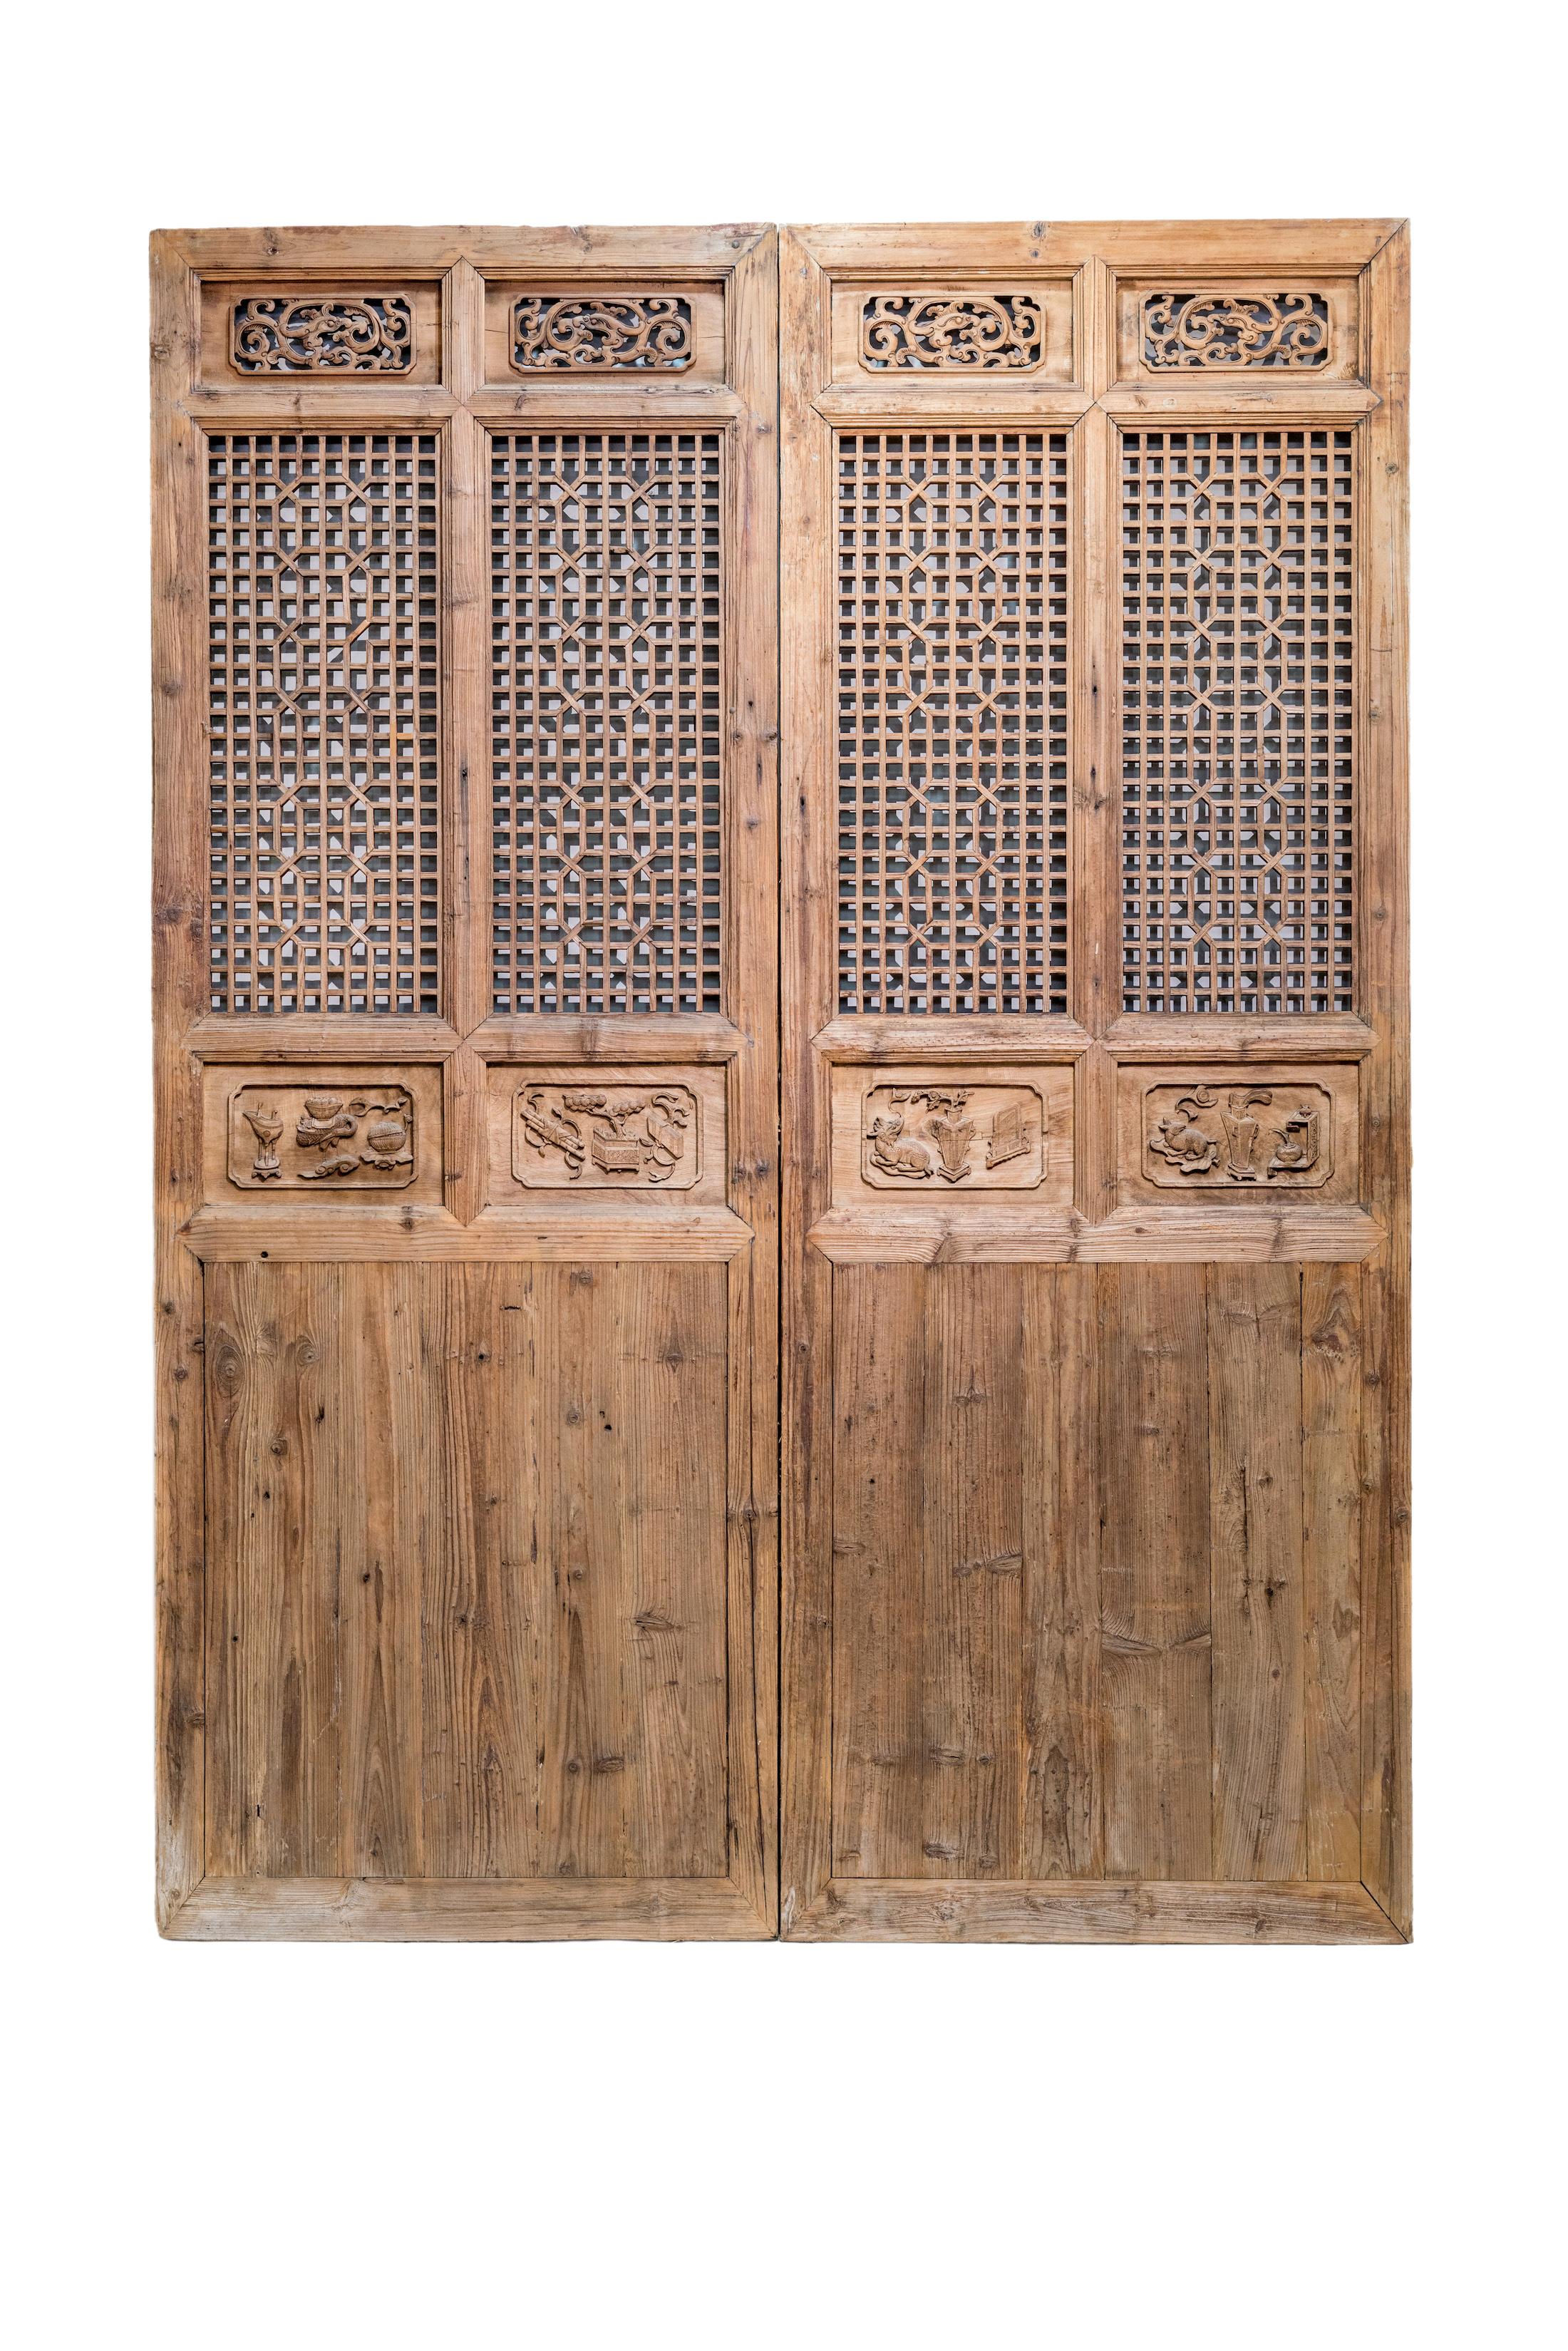 Late 19th century double-width door panels from Zhejiang province, China. The framework and plain bottom panels are made of Fir wood, while the latticework portion is made of Elm wood. 
Overall these doors have a simple design but the highlight is